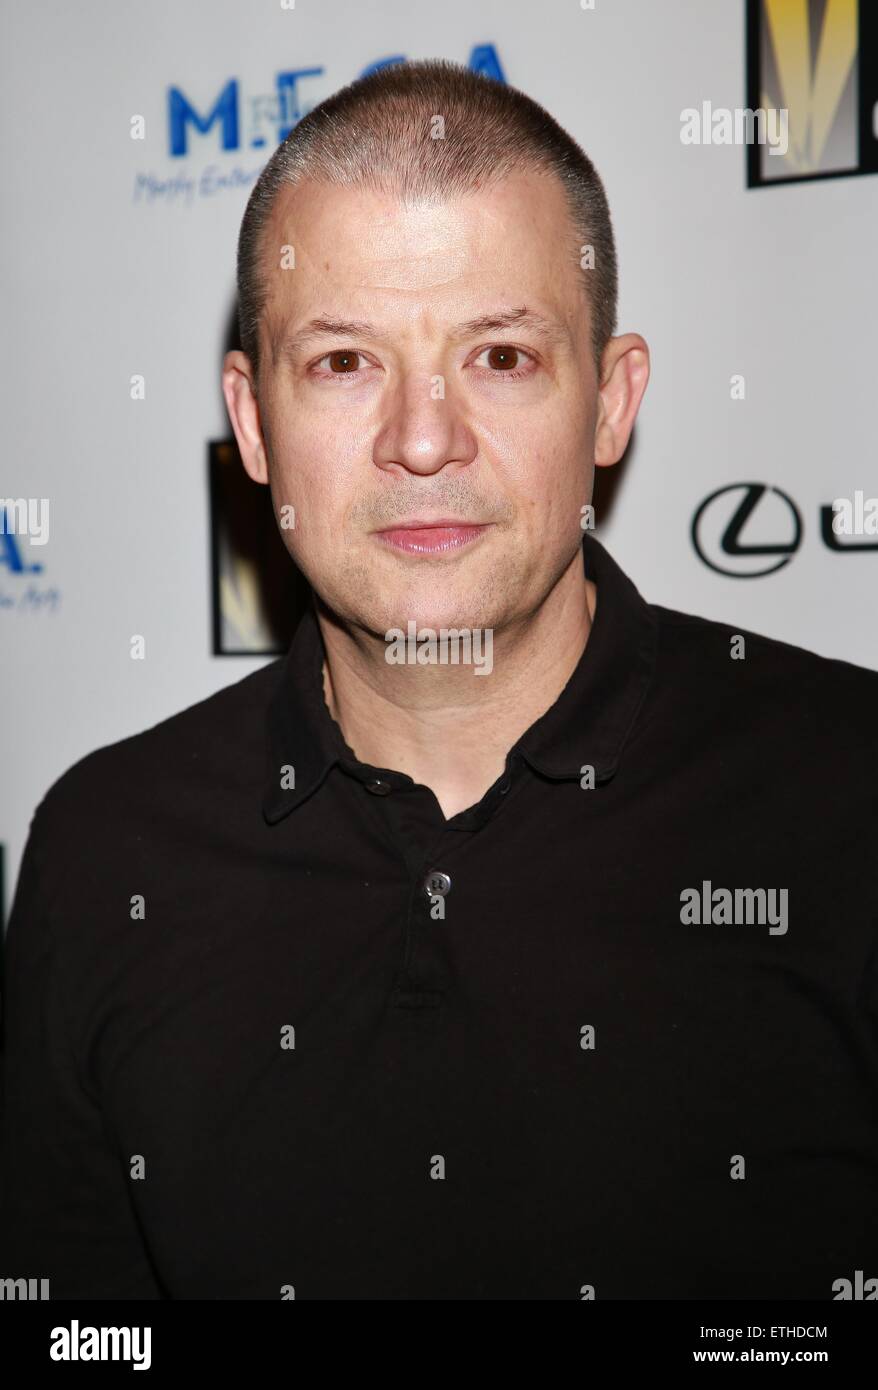 New York premiere party of 'Cop Show' at Caroline's On Broadway Comedy Club - Arrivals  Featuring: Jim Norton Where: New York, New York, United States When: 23 Feb 2015 Credit: Joseph Marzullo/WENN.com Stock Photo